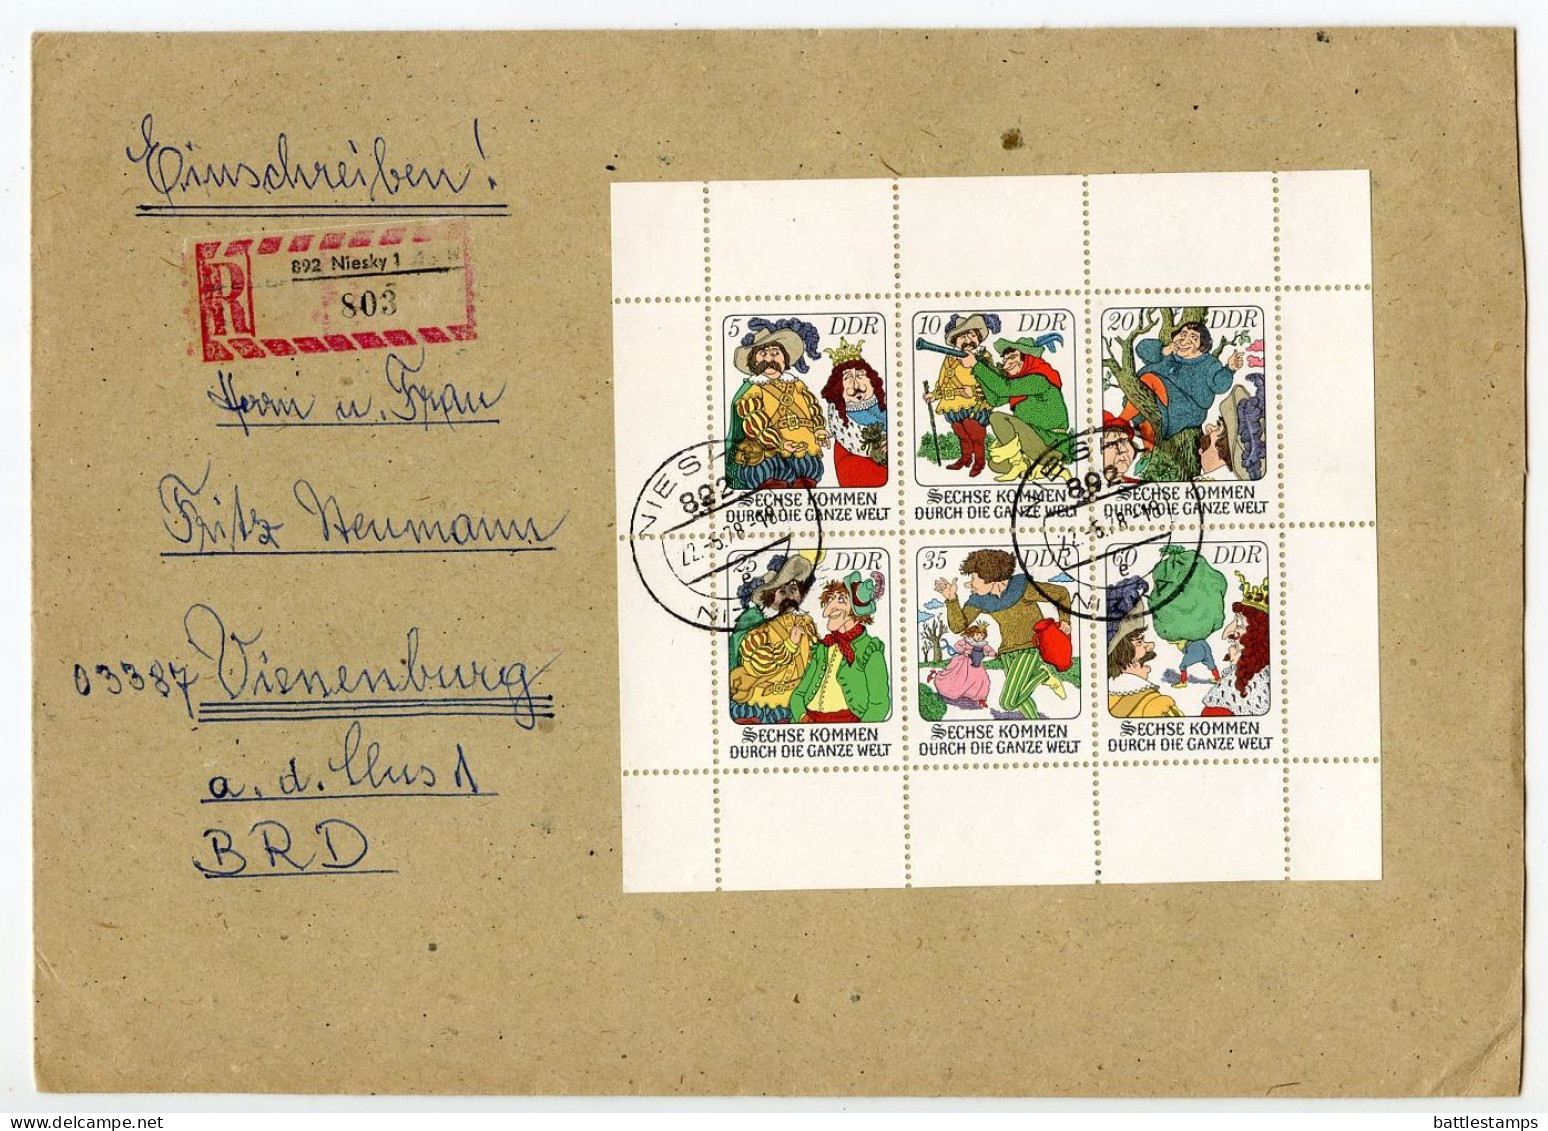 Germany, East 1978 Registered Cover; Niesky To Vienenburg; Stamps - Six Men Around The World Fairy Tale, Block Of 6 - Covers & Documents